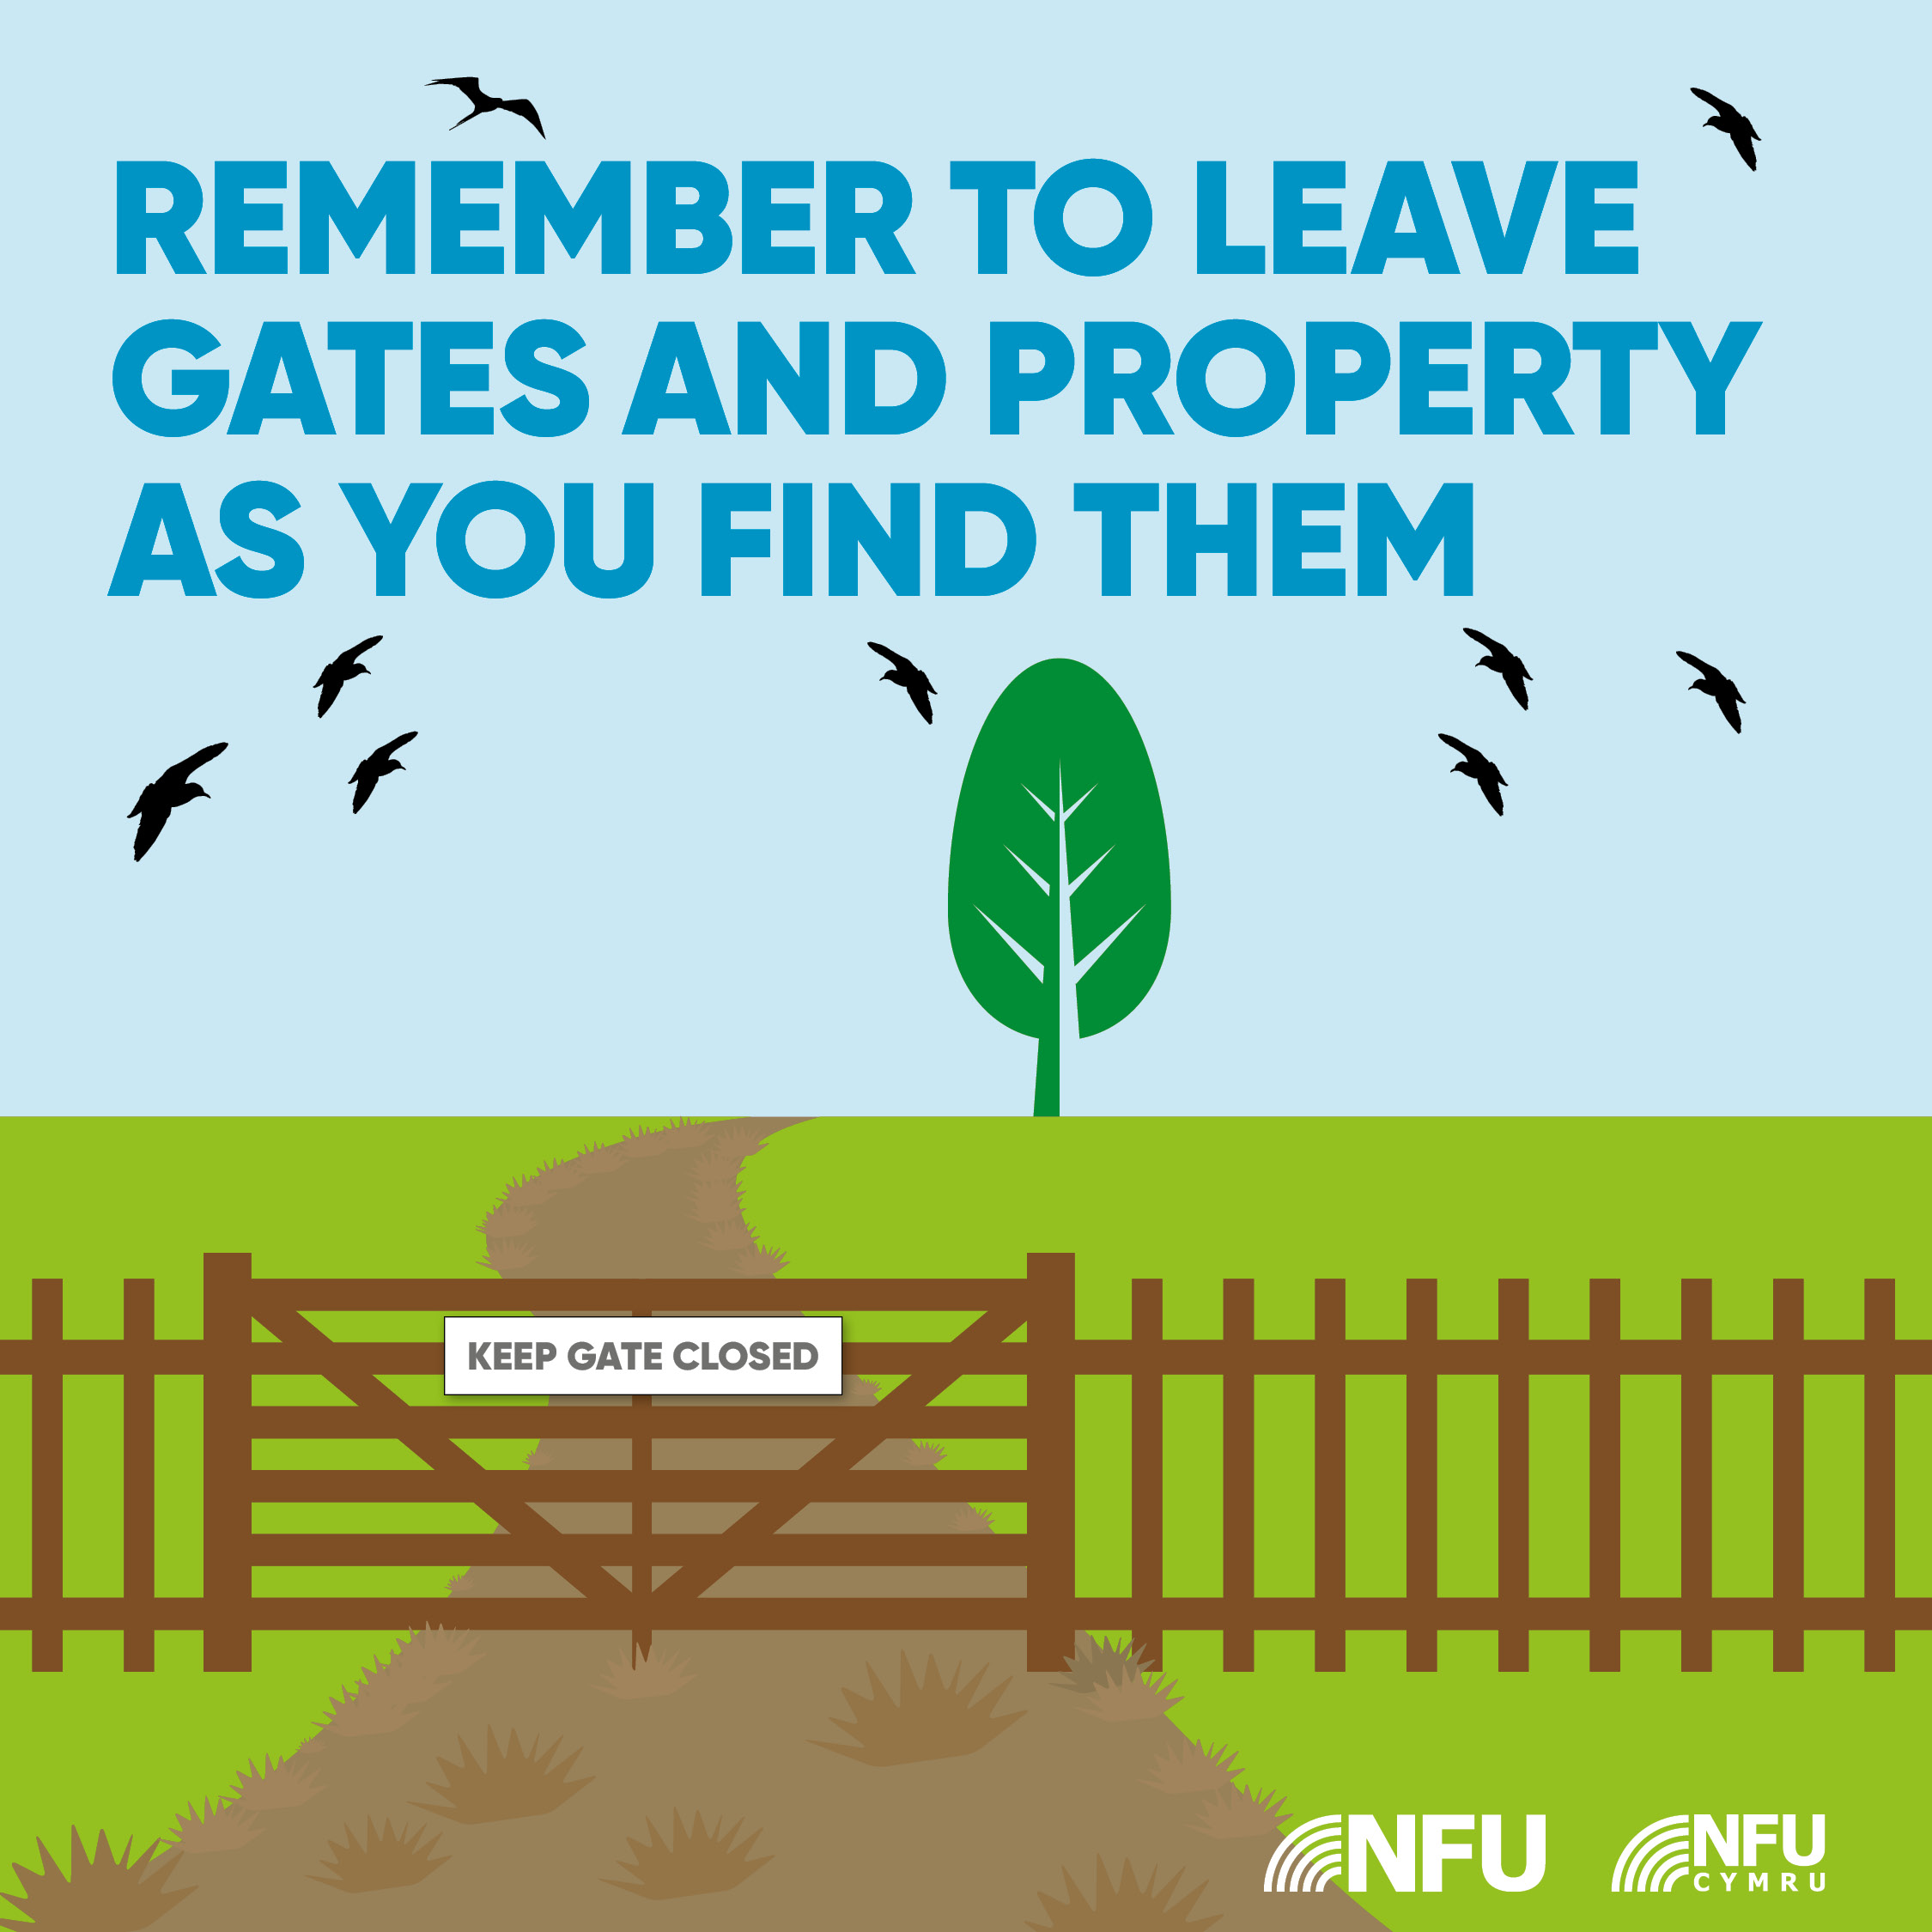 Remember to leave gates and property as you find them